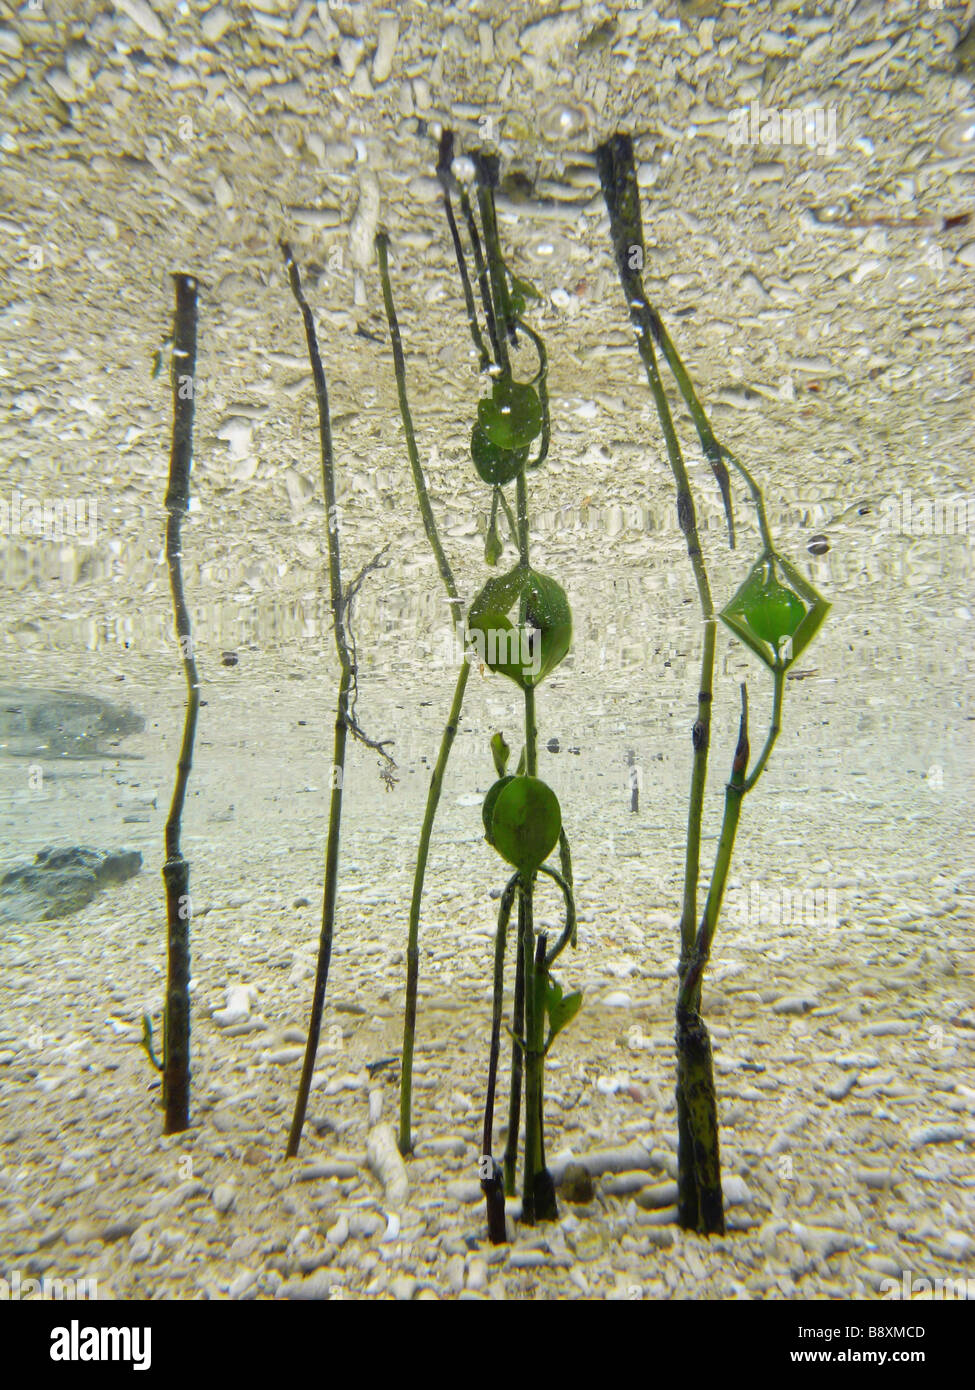 Young mangrove saplings (Avicennia marina) sprouting in shallow water, Great Barrier Reef Marine Park, Queensland, Australia Stock Photo